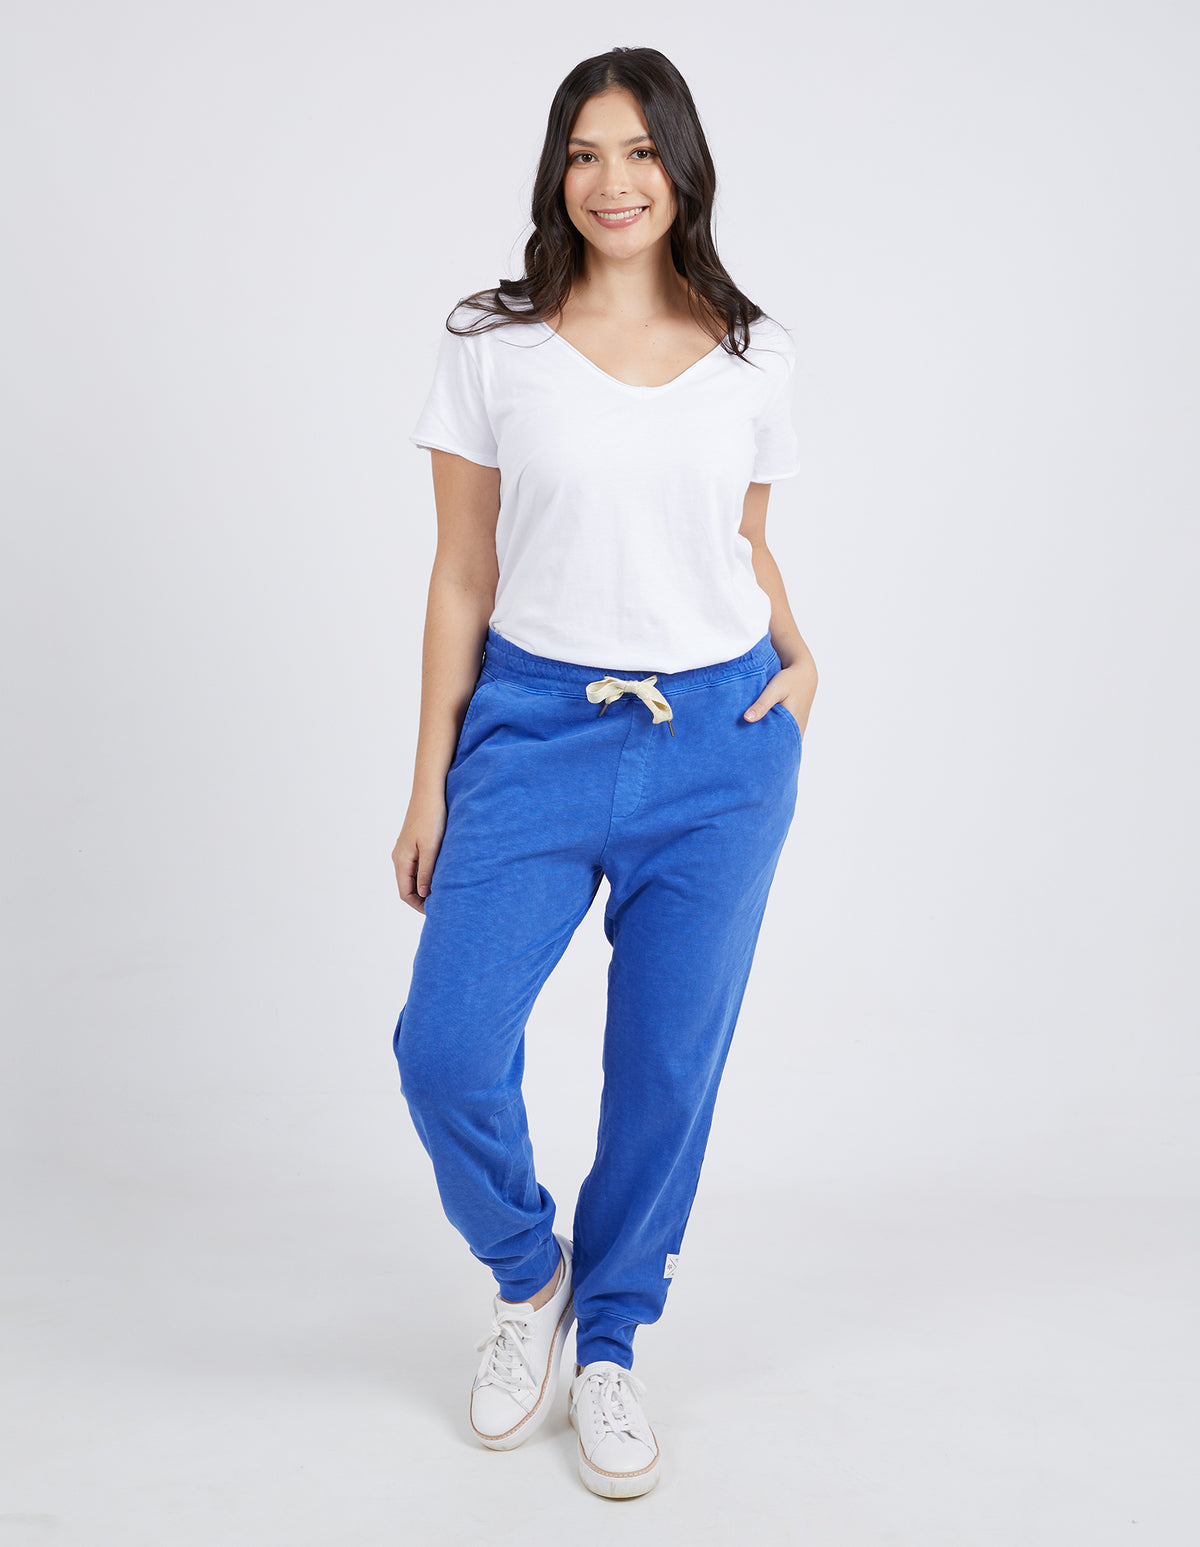 Elm - Out and About Pant - Royal Blue